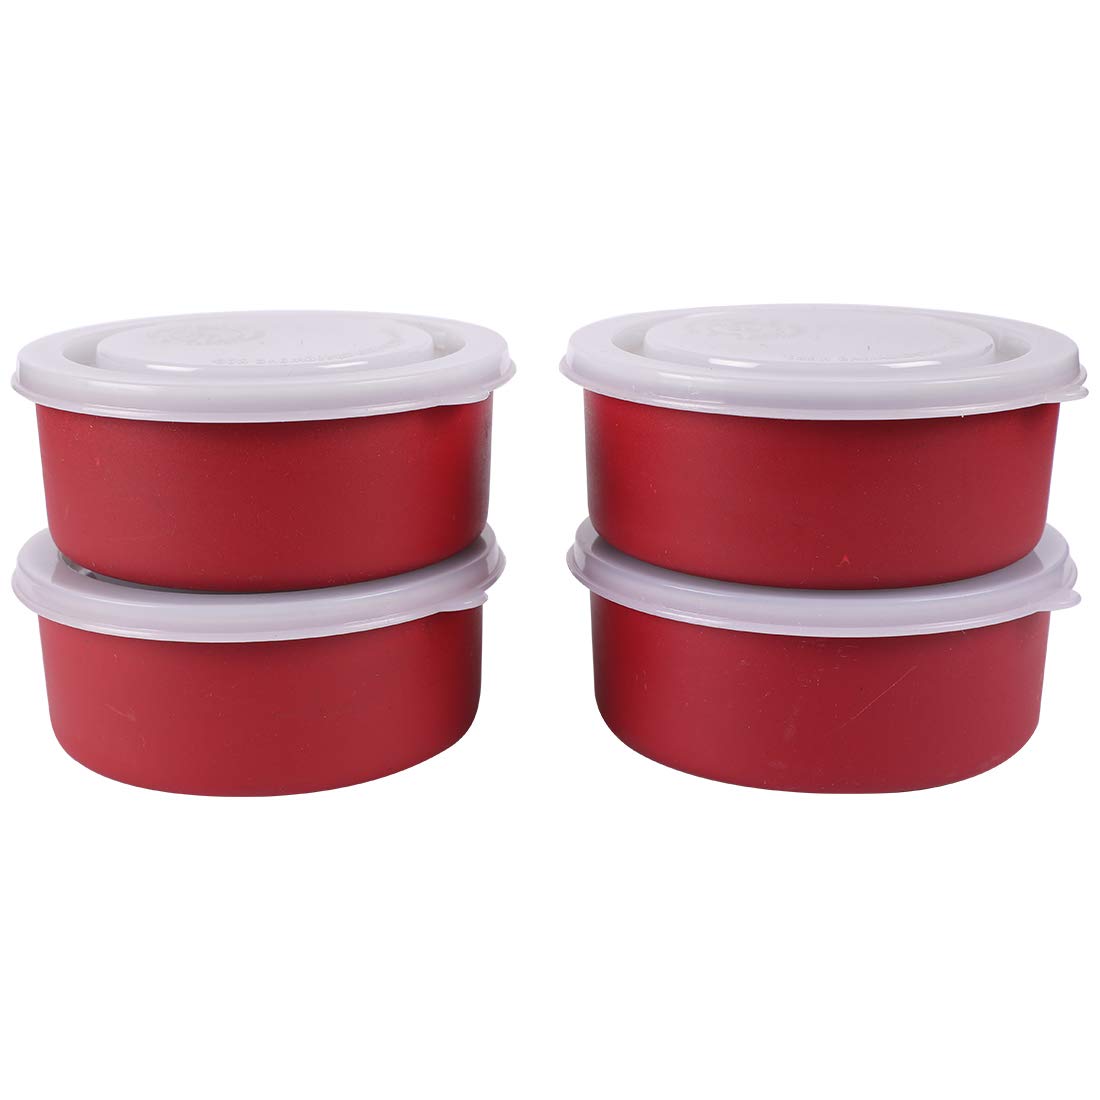 Microwave Safe Stainless Steel Small Containers for Office/Home Set of 4 (RED, 4 x 11 CM, 4 x 300 ML Approx.)